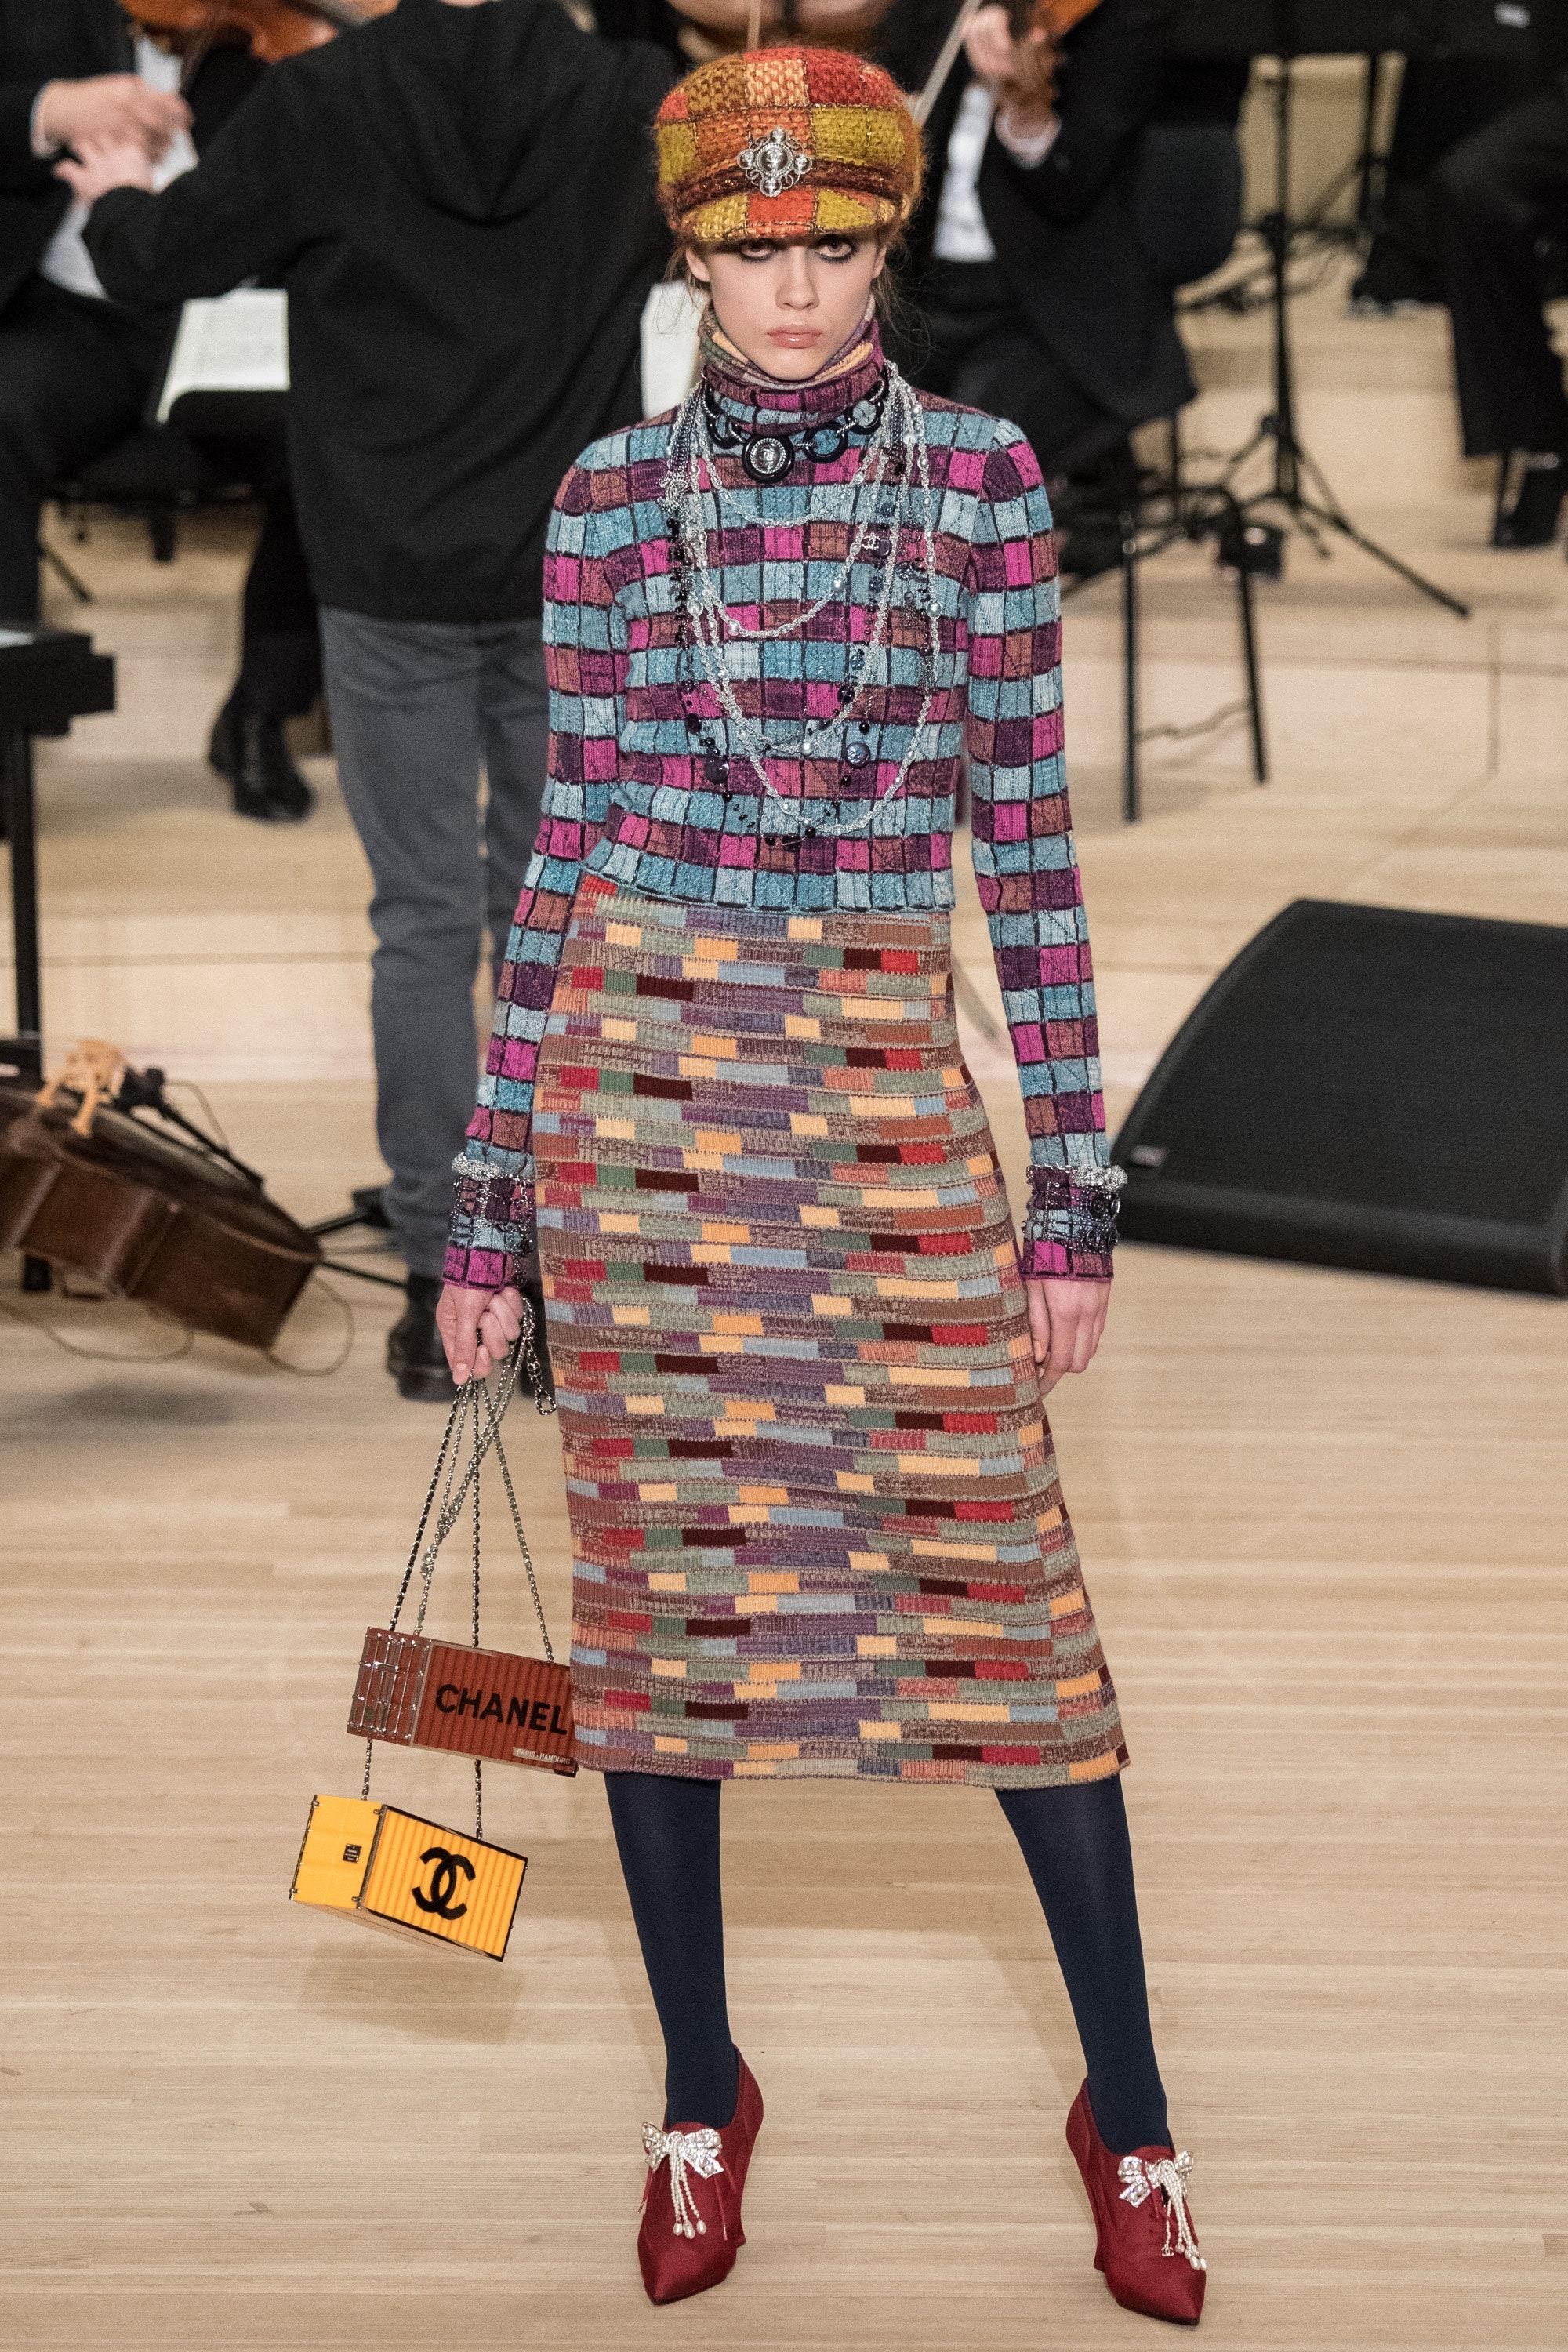 Iconic “bricks” cashmere dress from Runway of Paris / HAMBURG Metiers d’Art Collection , 2018 Pre-Fall Metiers d'Art
Same style Chanel dress As seen on Jennifer Lopez
Colors like a masterpiece 
- CC logo charm at waist
Size mark 42 fr
Condition: